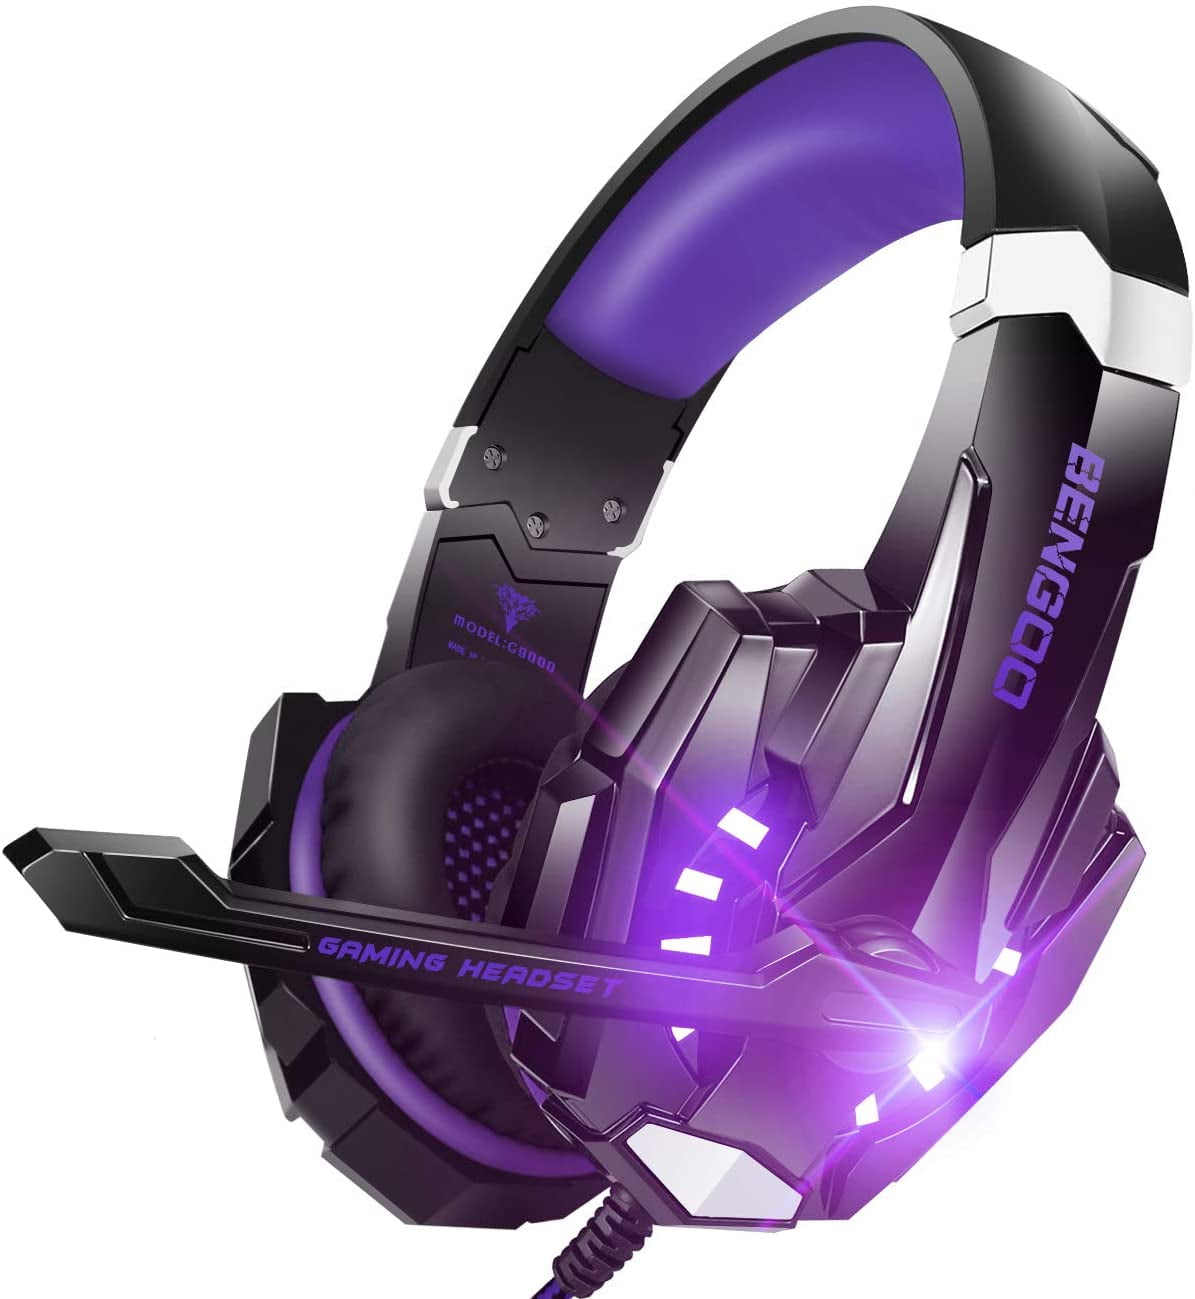 BENGOO G9000 Stereo Gaming Headset for PS4, PC, Xbox One ...